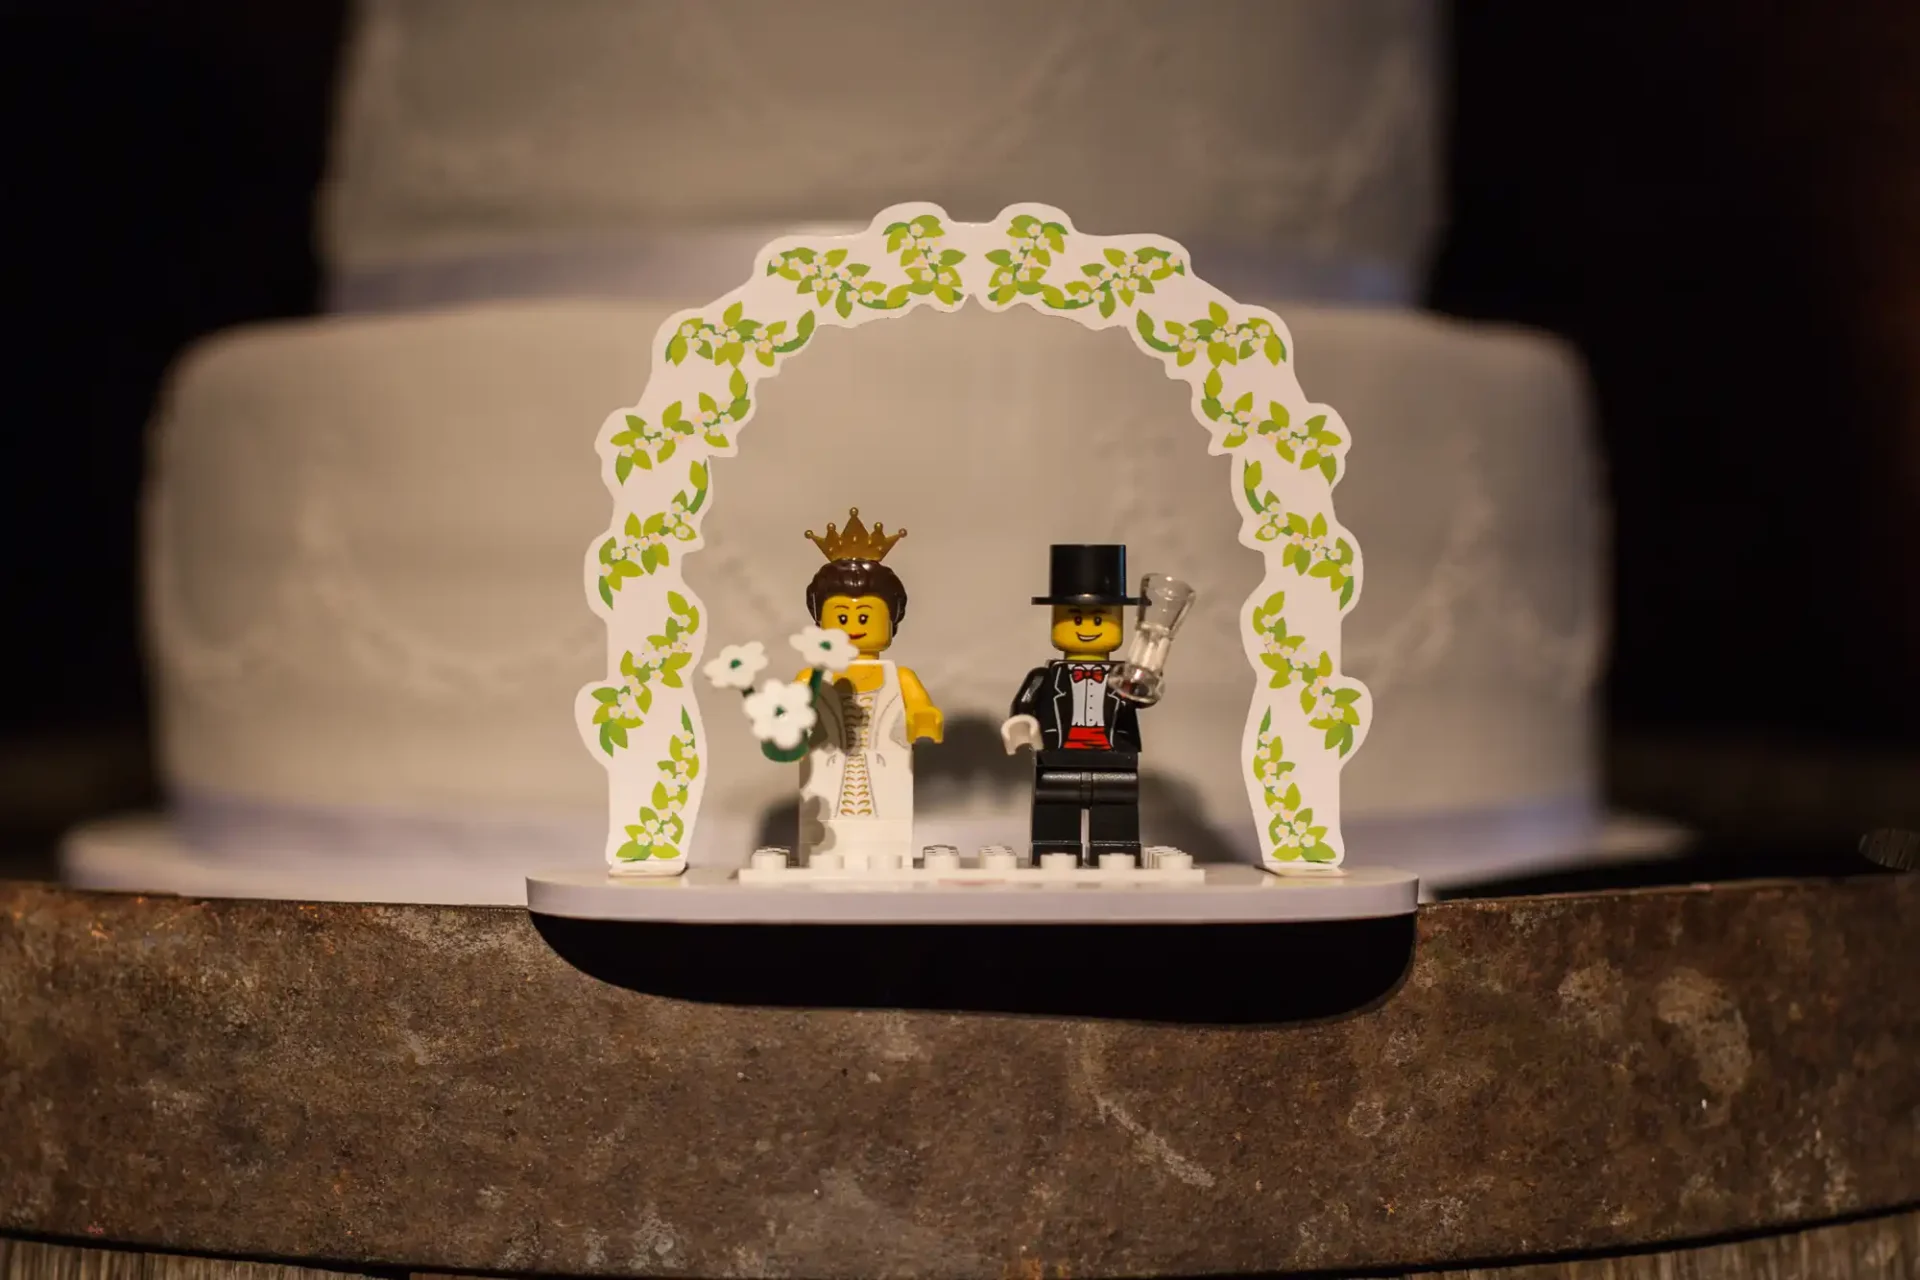 Lego bride and groom figures under a floral arch, with a blurred wedding cake in the background.